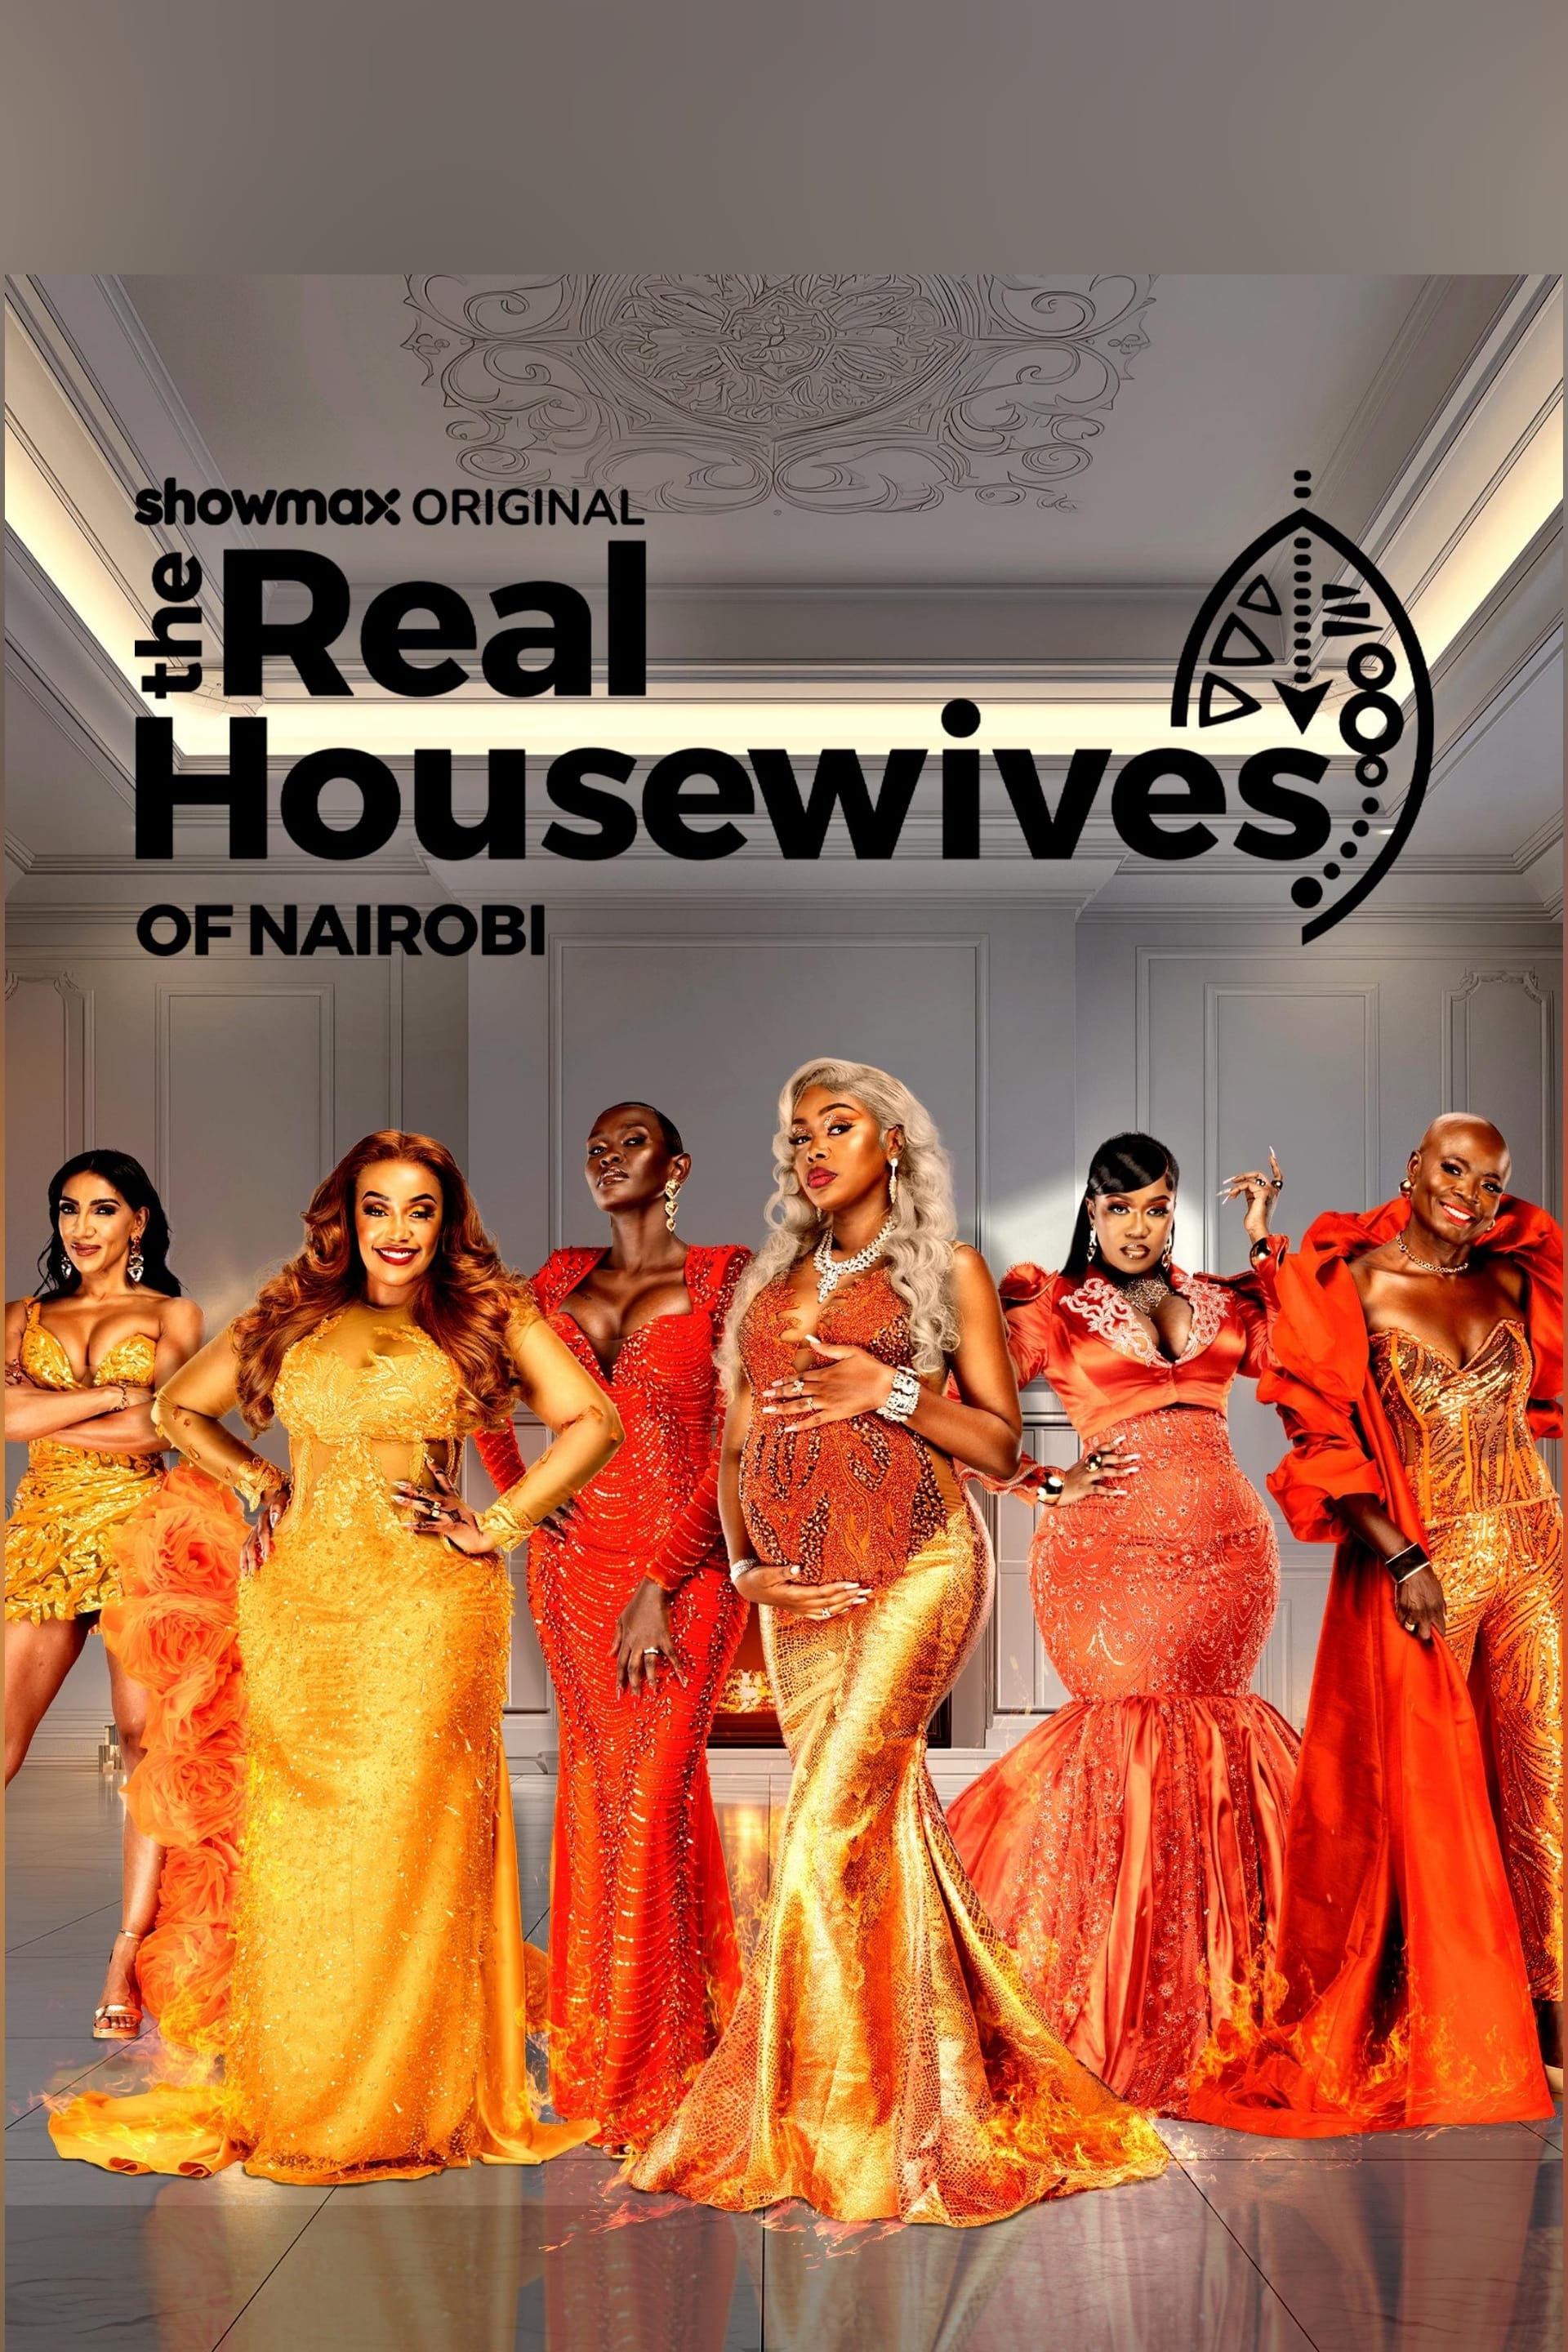 The Real Housewives of Nairobi